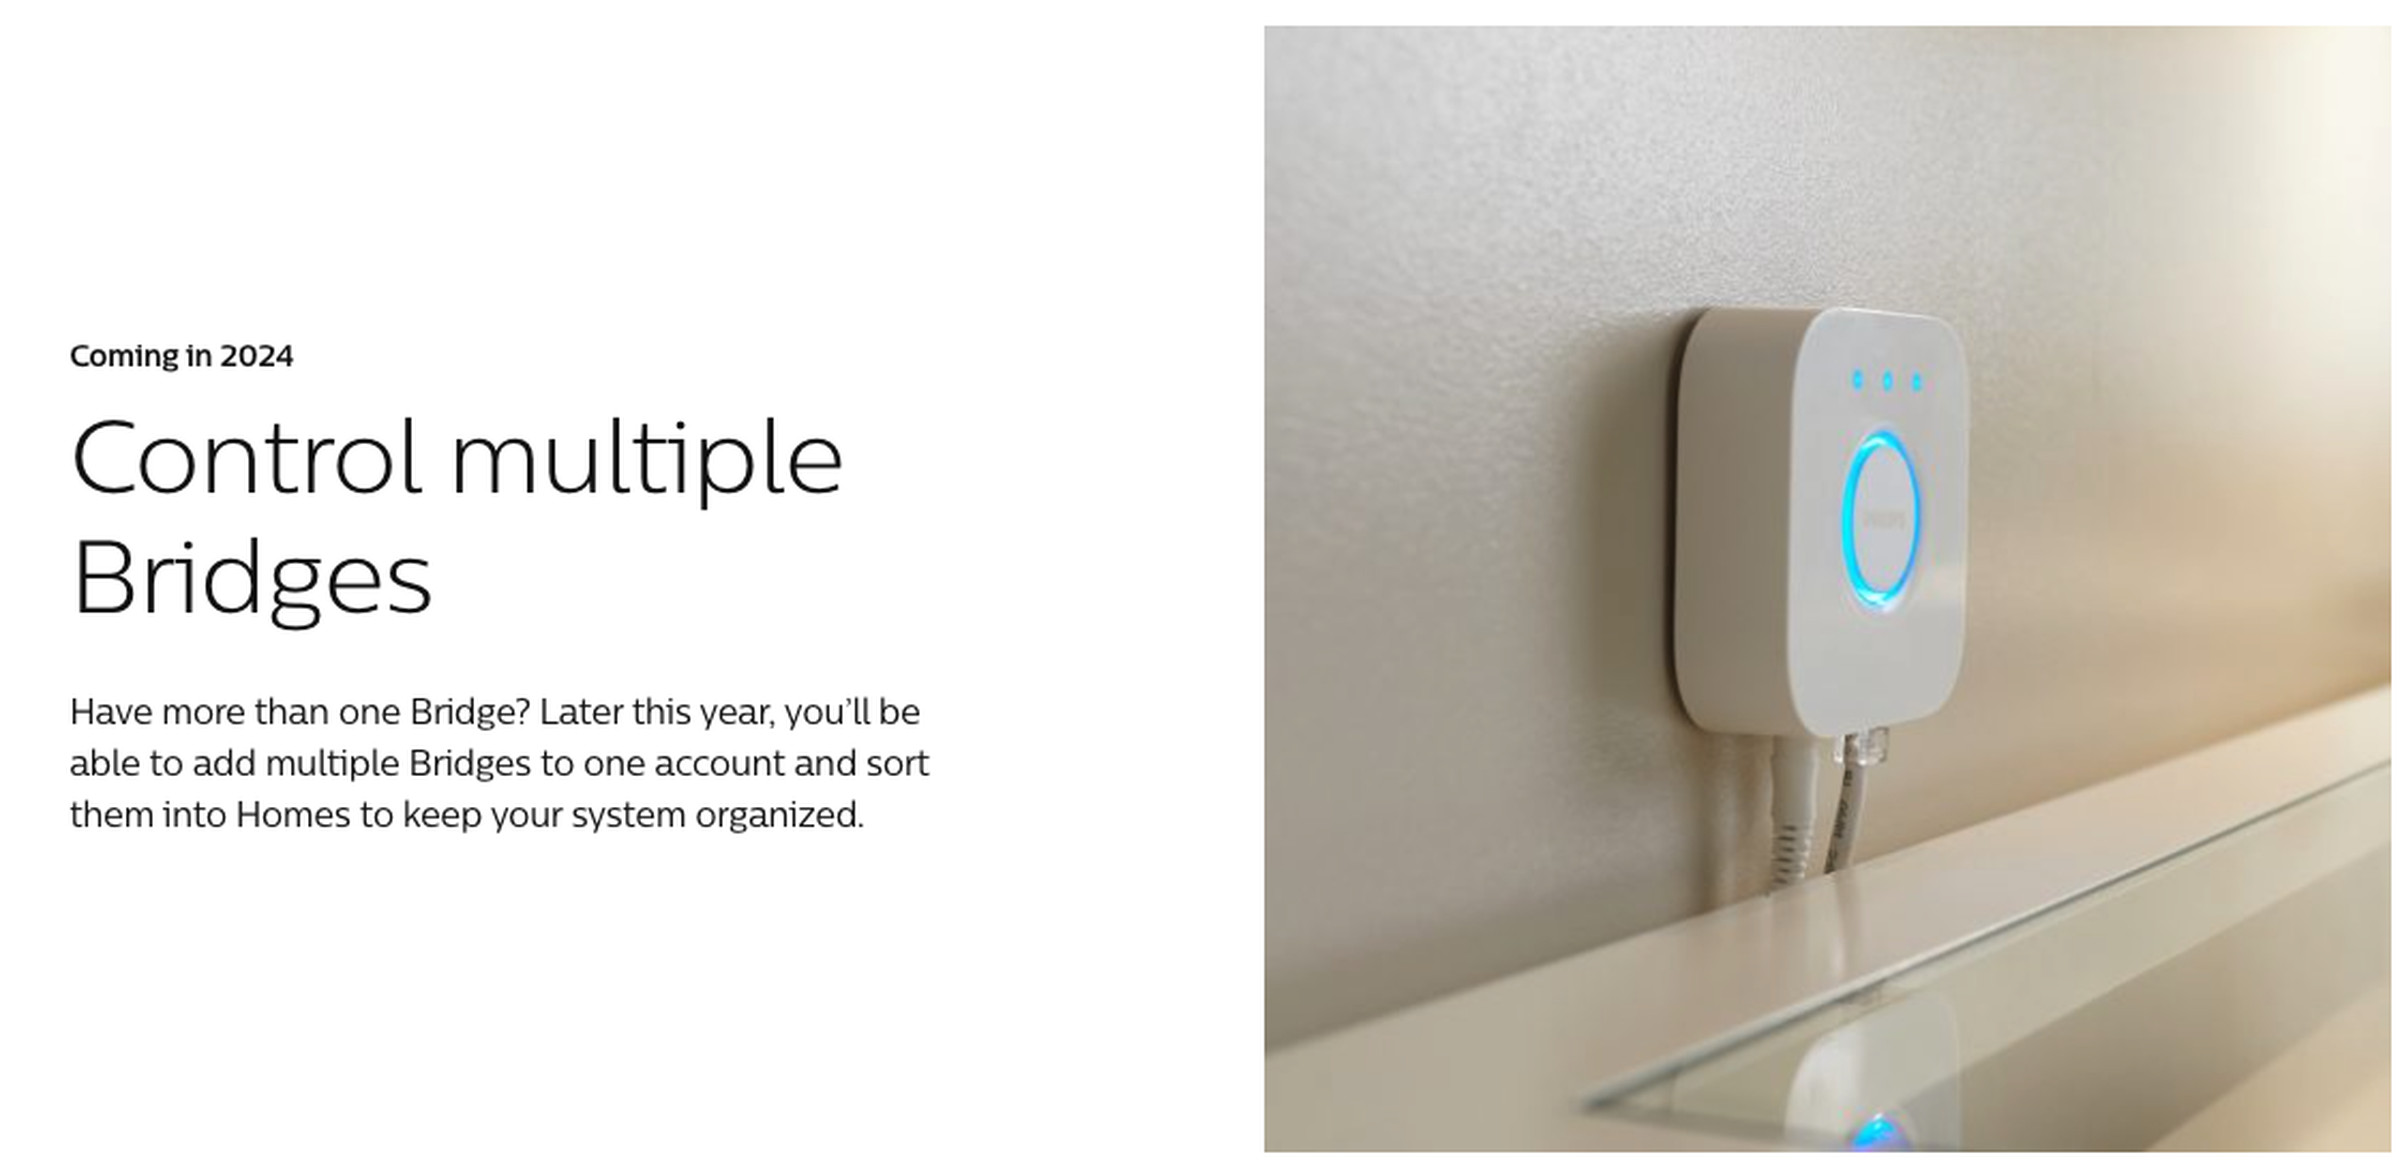 Philips Hue is promising to bring support for multiple bridges to its platform later this year. 